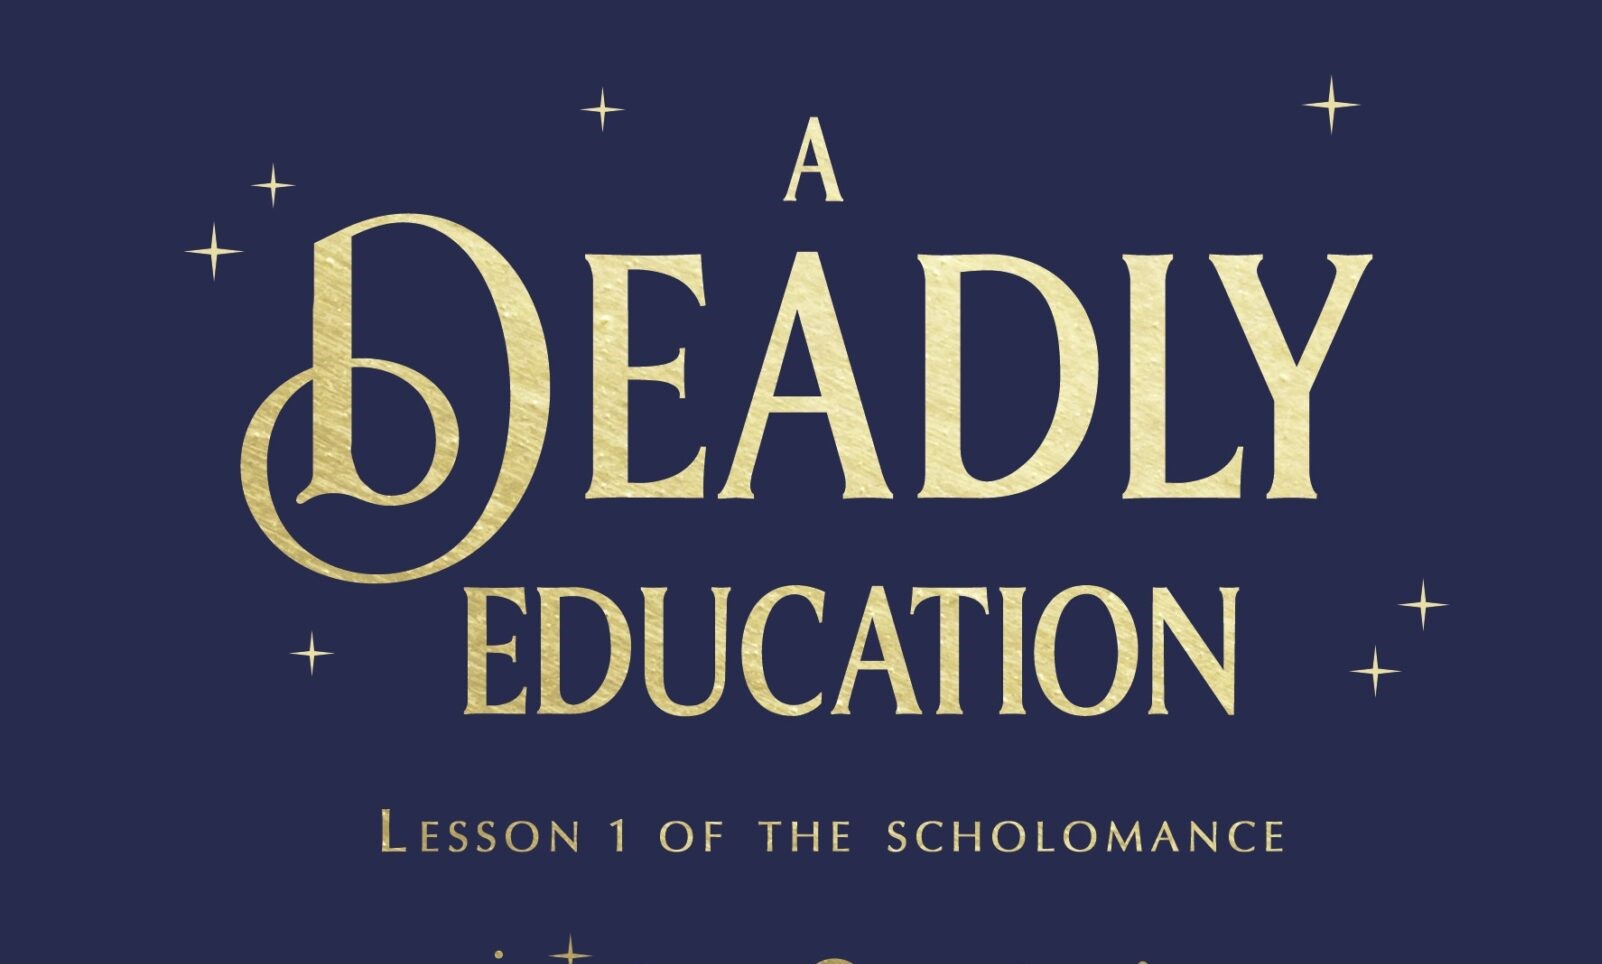 Book Cover For Naomi Novik's A Deadly Education